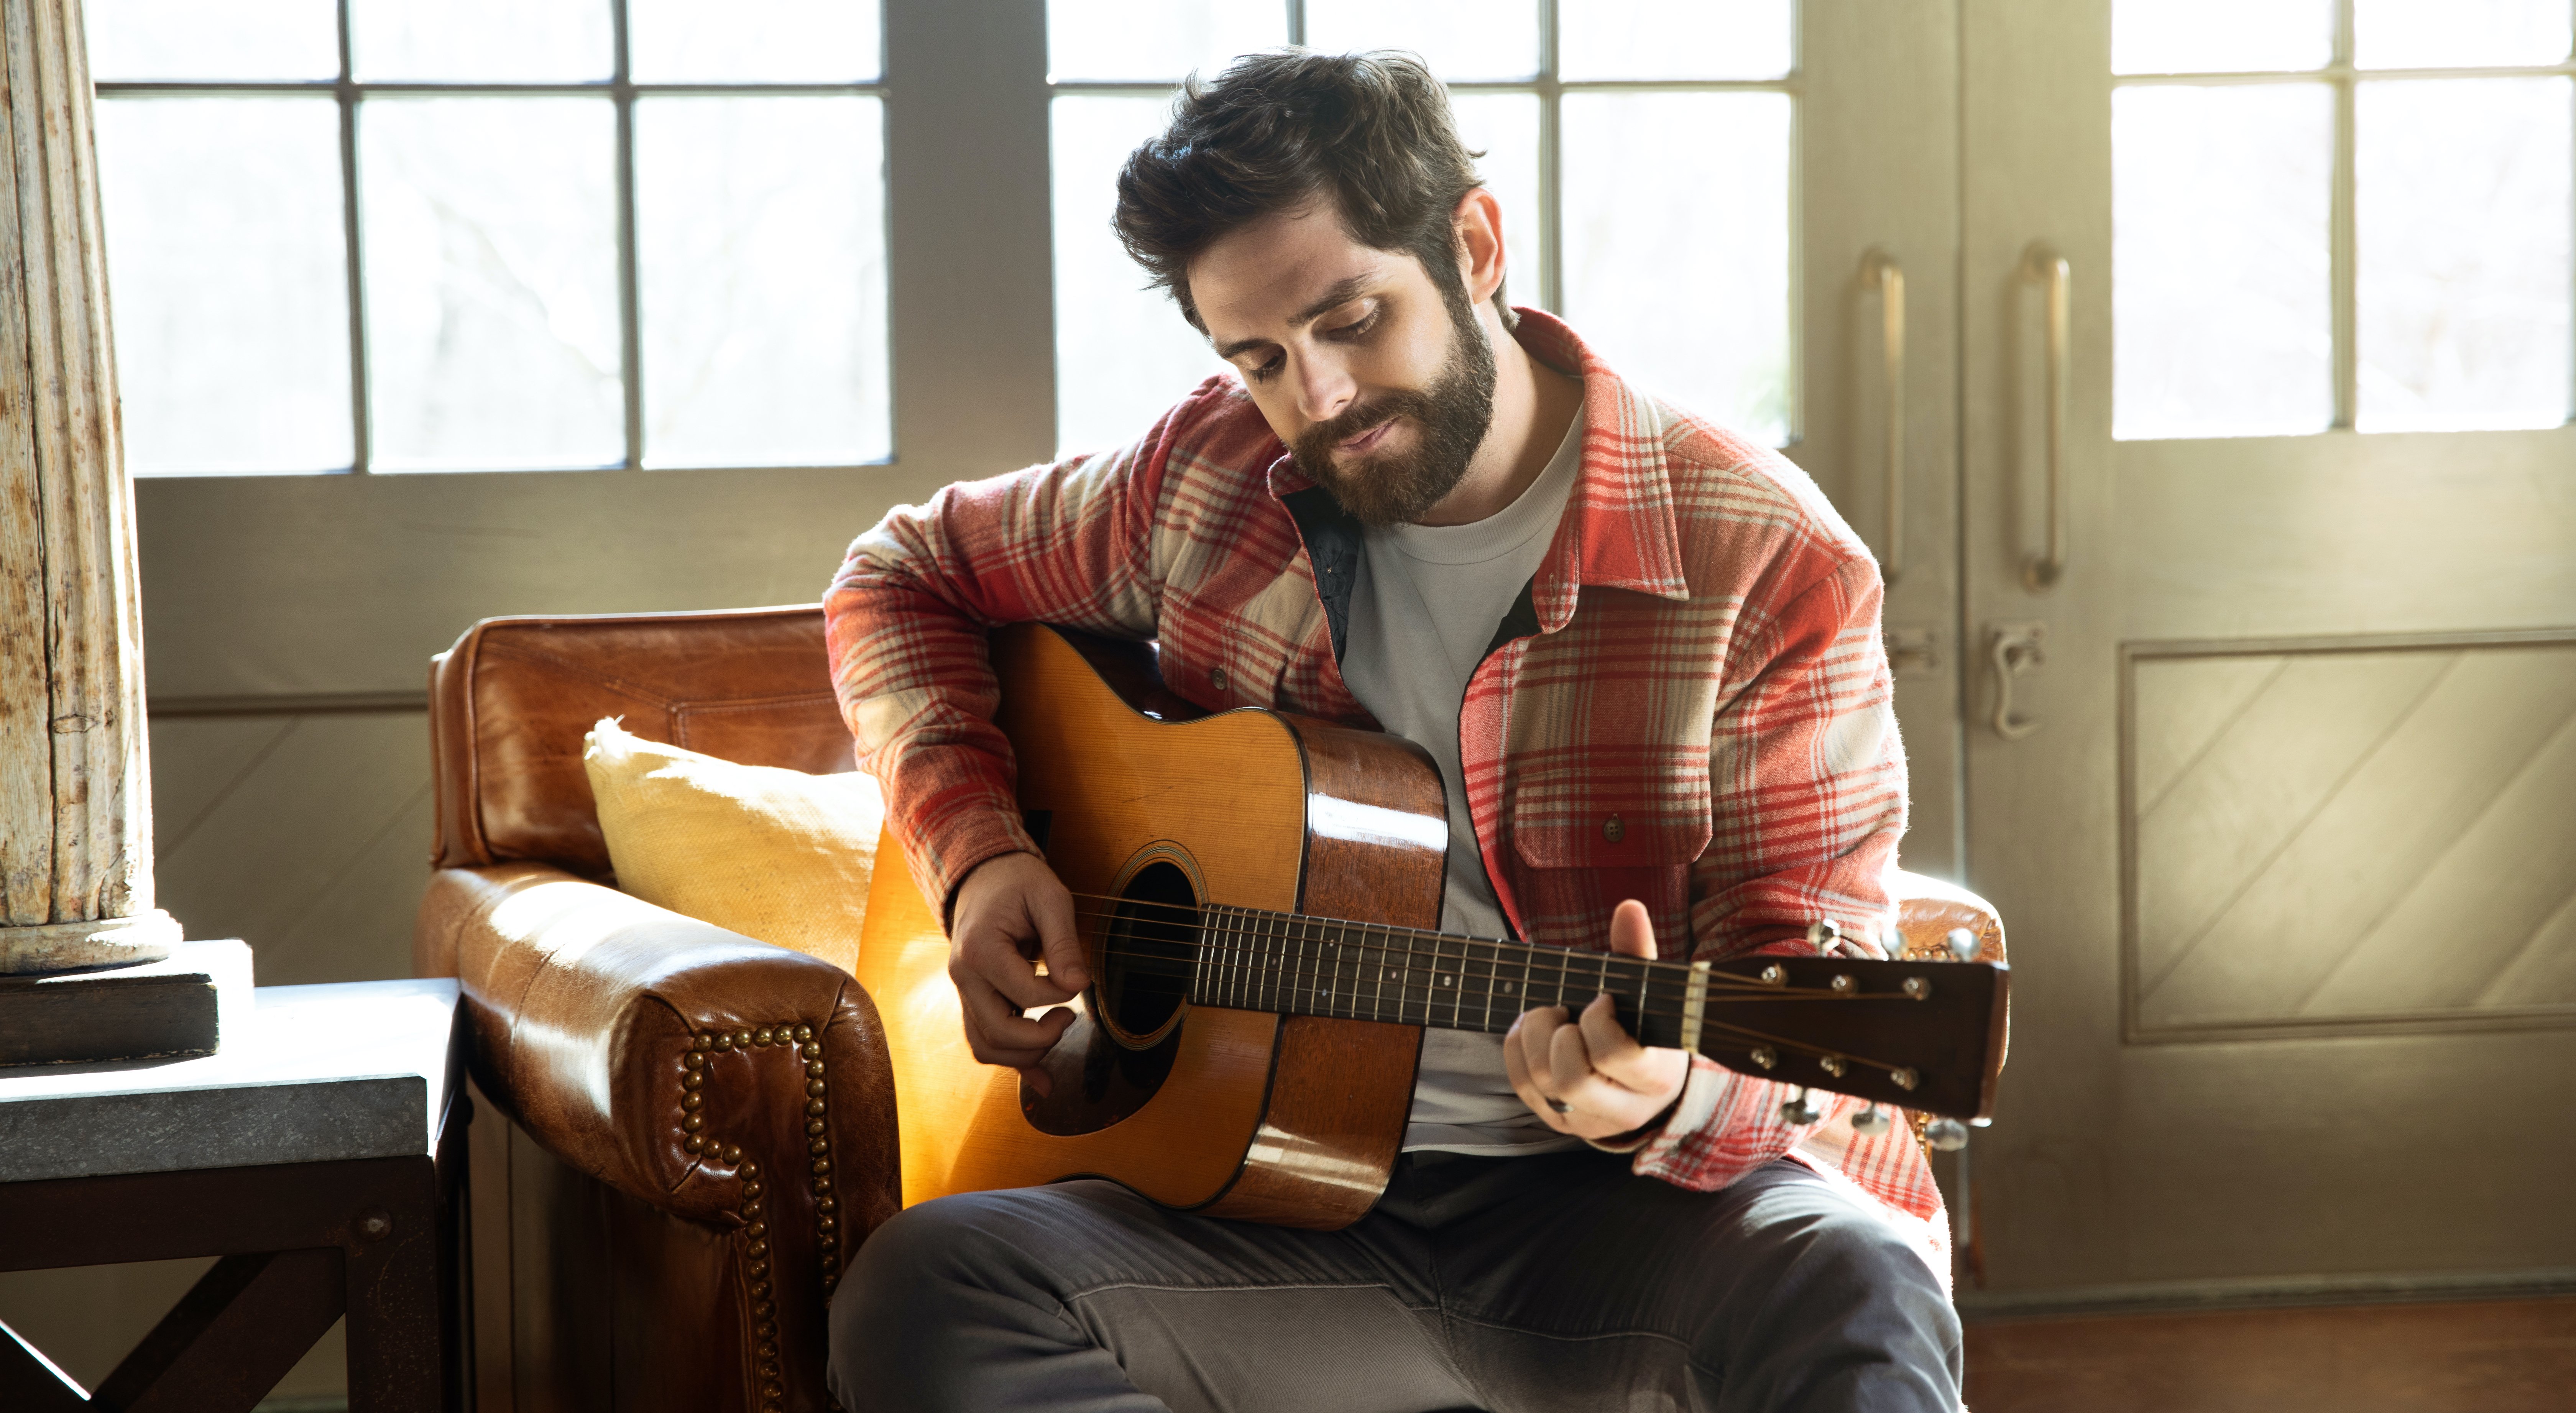 A Deep Dive Into Partnering with GRAMMY-Nominated Artists: Thomas Rhett